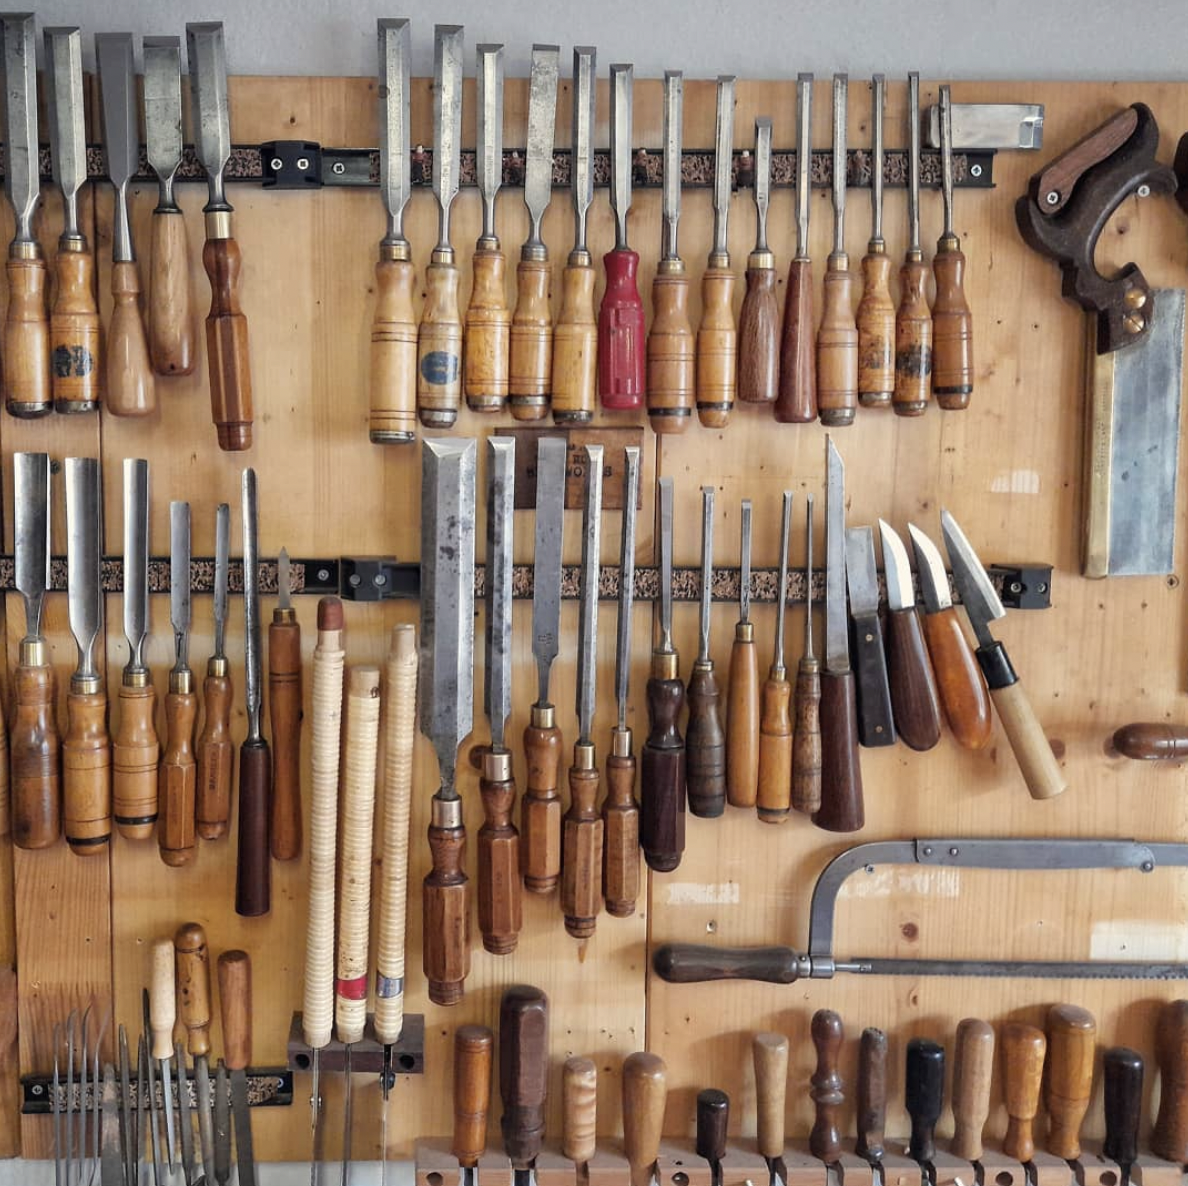 Rustic Wooden Storage For Garage Tool